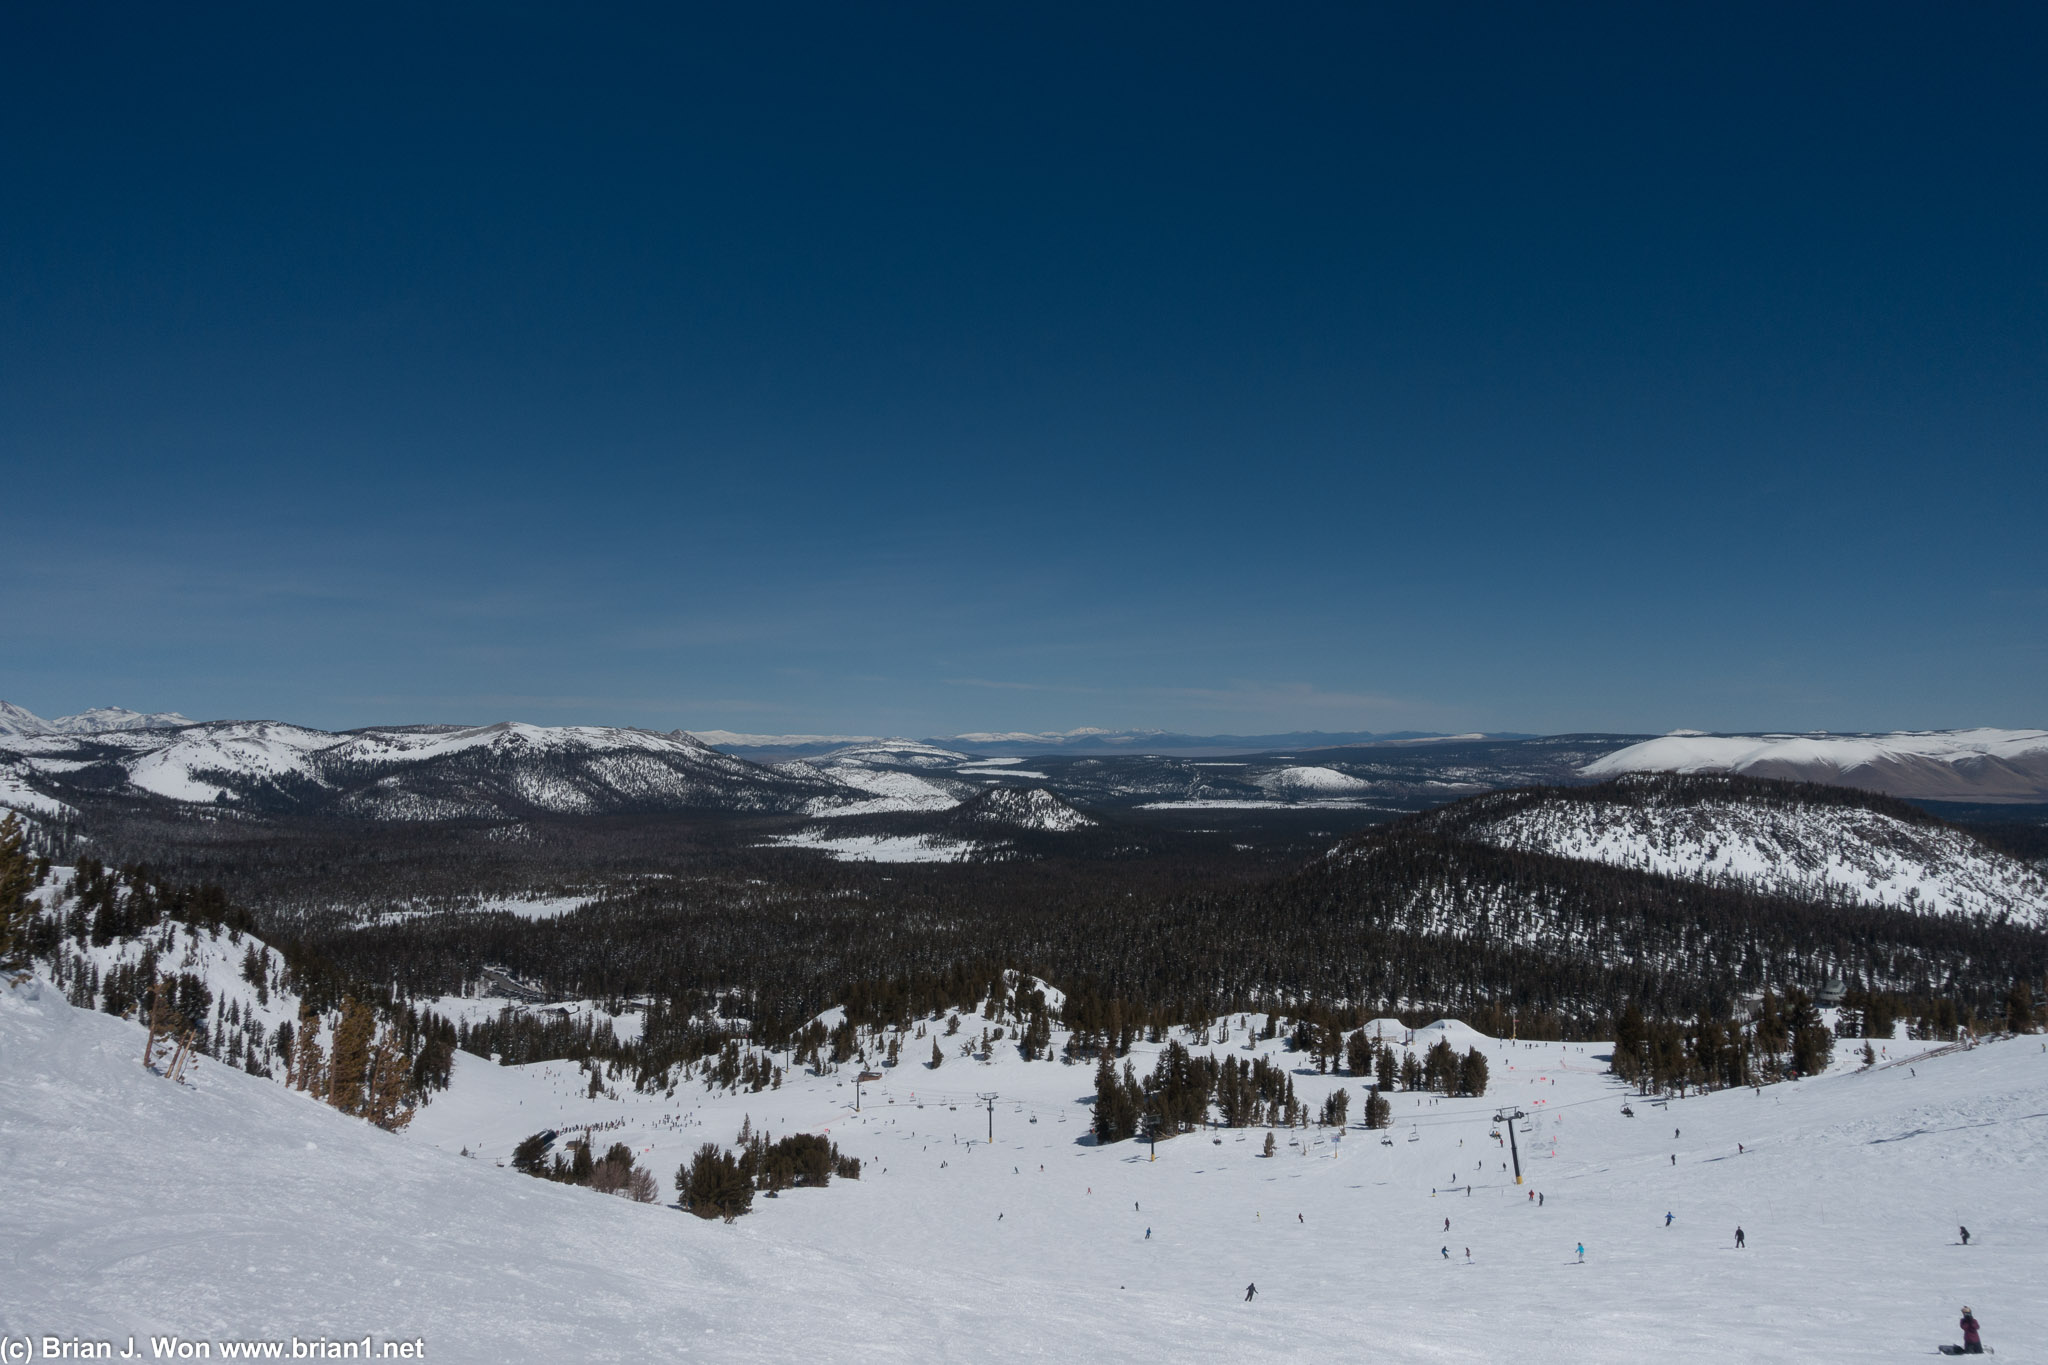 Perfectly clear day as seen from the top of High Five.